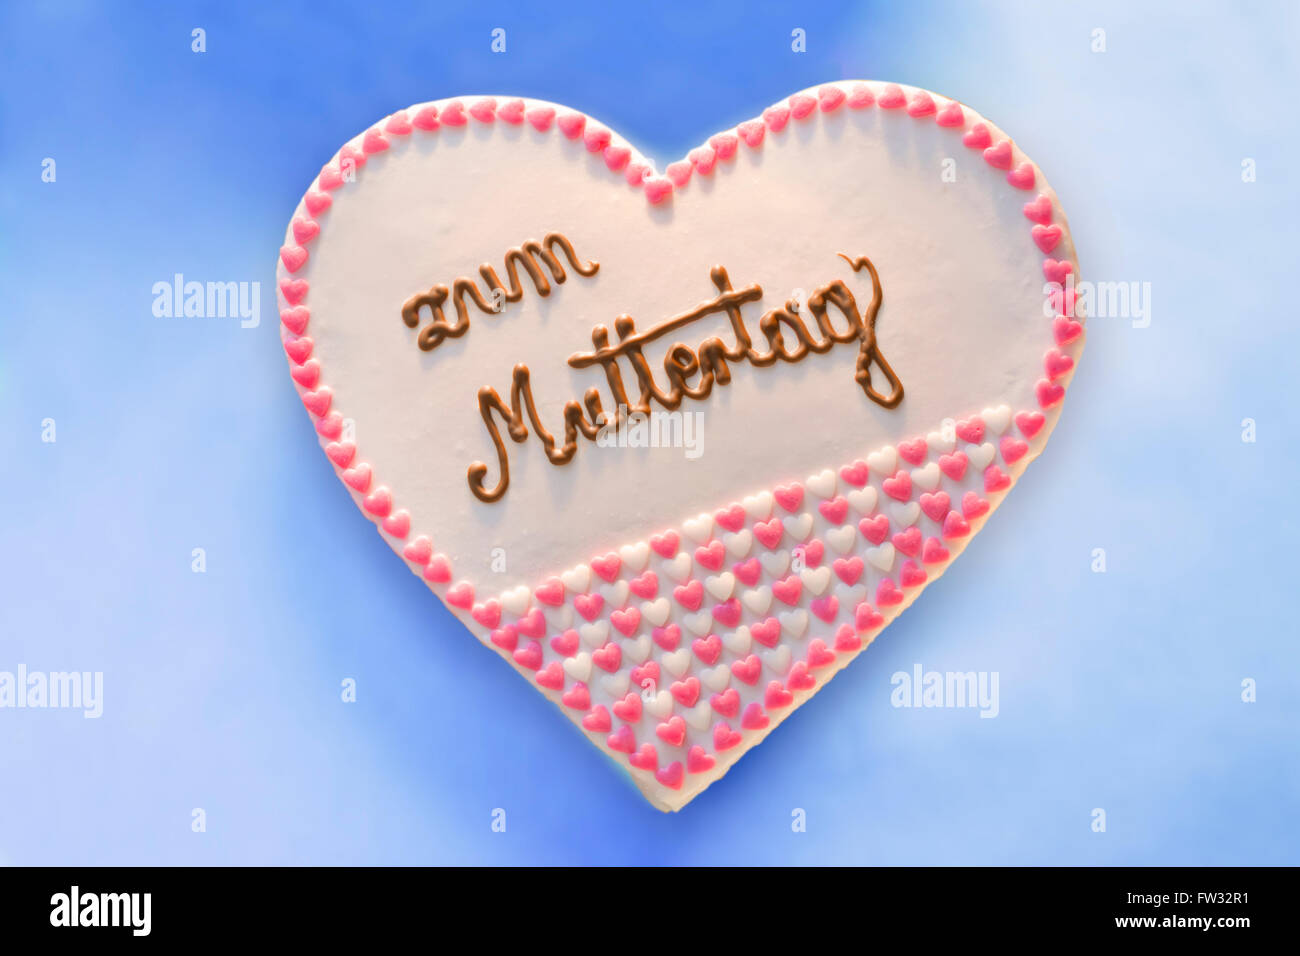 Cake with lettering that says Zum Muttertag, For Mother's Day Stock Photo